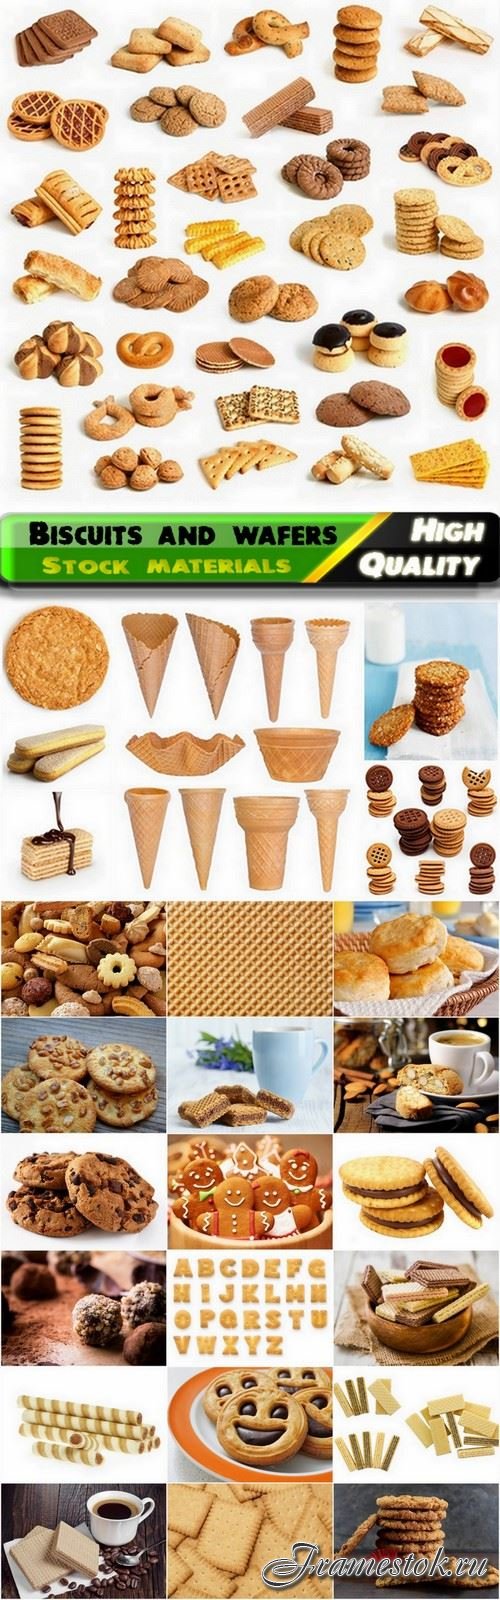 Delicious and sweet biscuits and wafers - 25 HQ Jpg